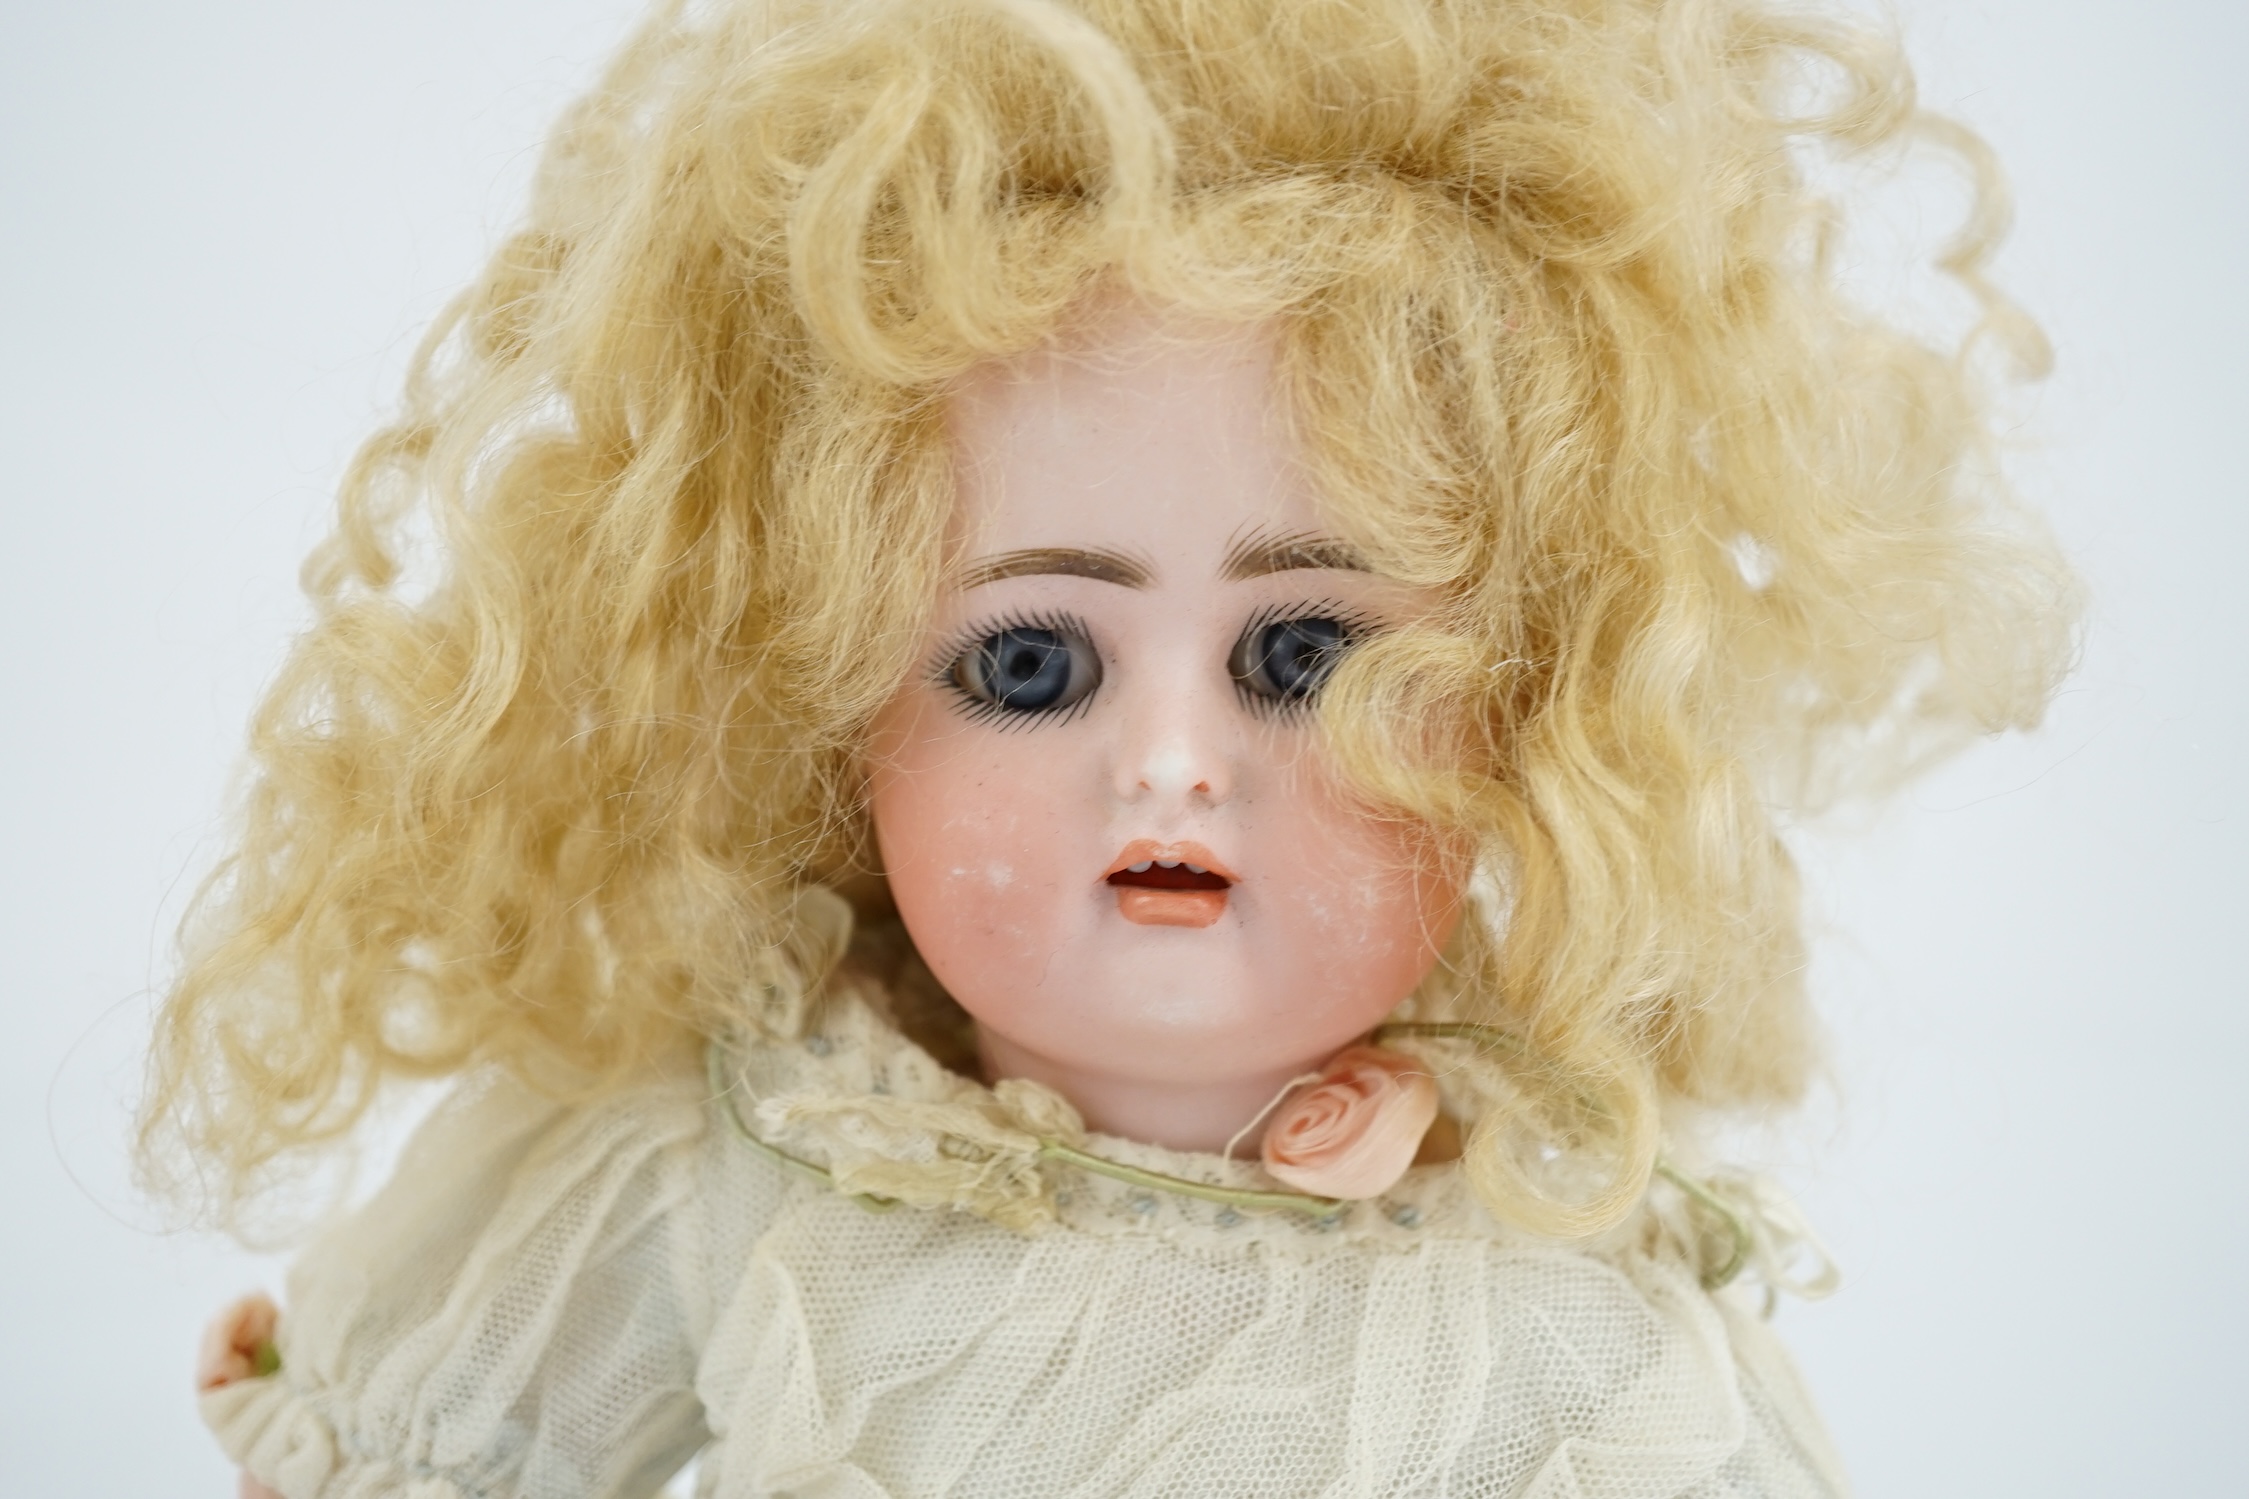 A Kammer & Reinhart / S & H bisque head doll, pierced ears, vintage clothes, one finger missing, - Image 2 of 5